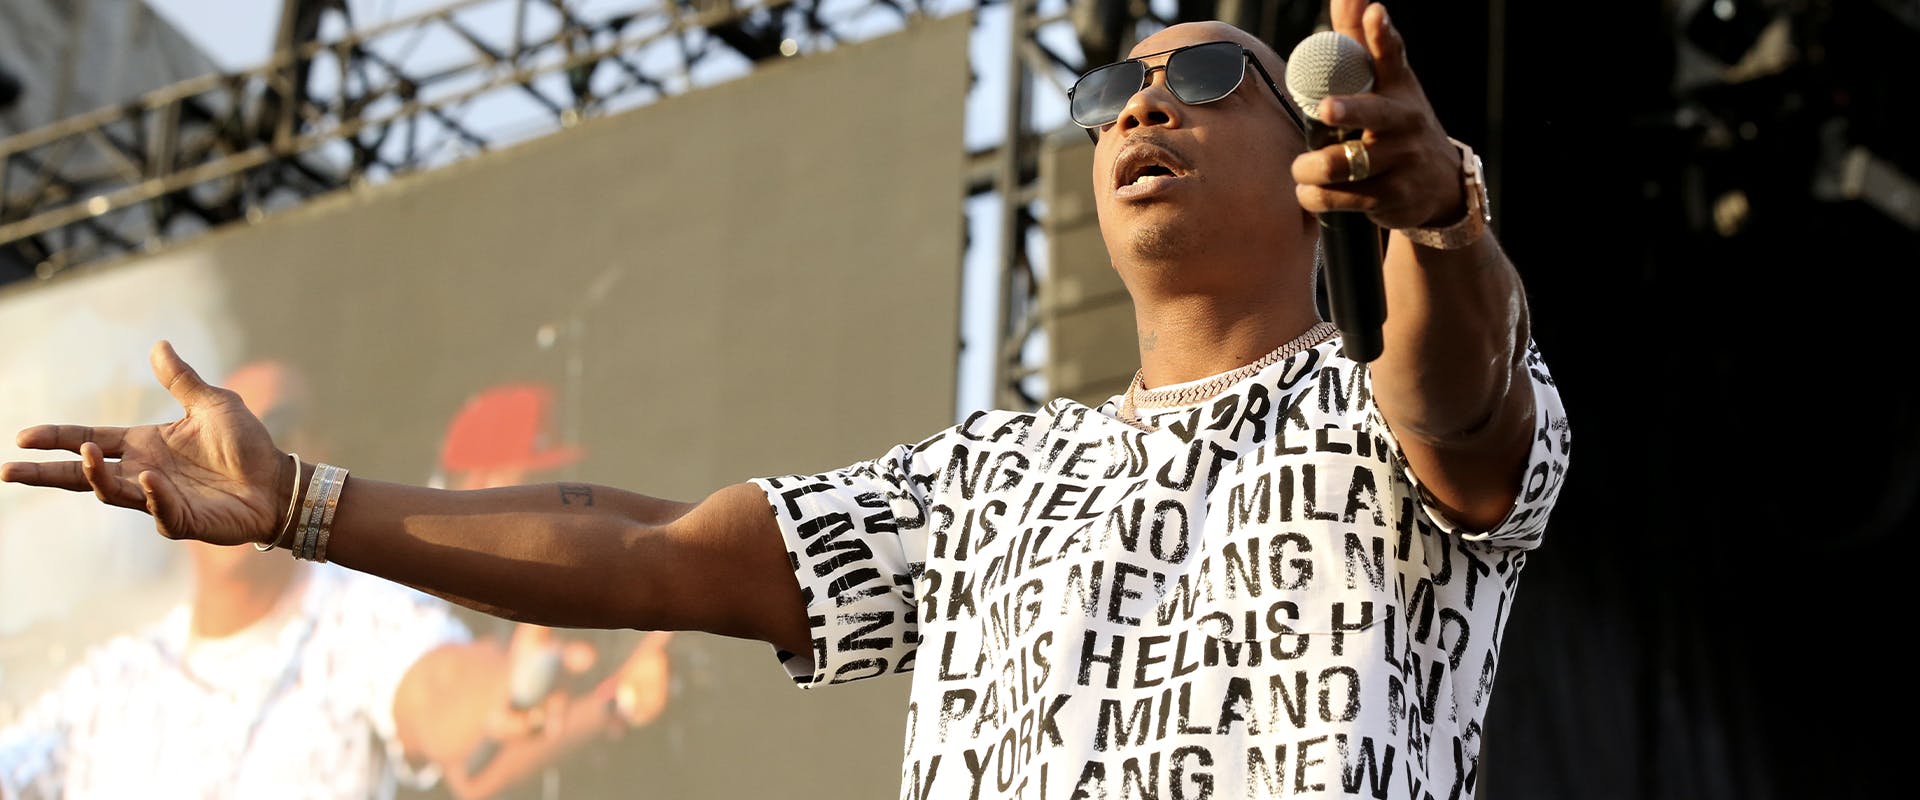 Ja Rule performs during the 2022 Lovers & Friends music festival at the Las Vegas Festival Grounds on May 15, 2022 in Las Vegas, Nevada. (Photo by Gabe Ginsberg/Getty Images)